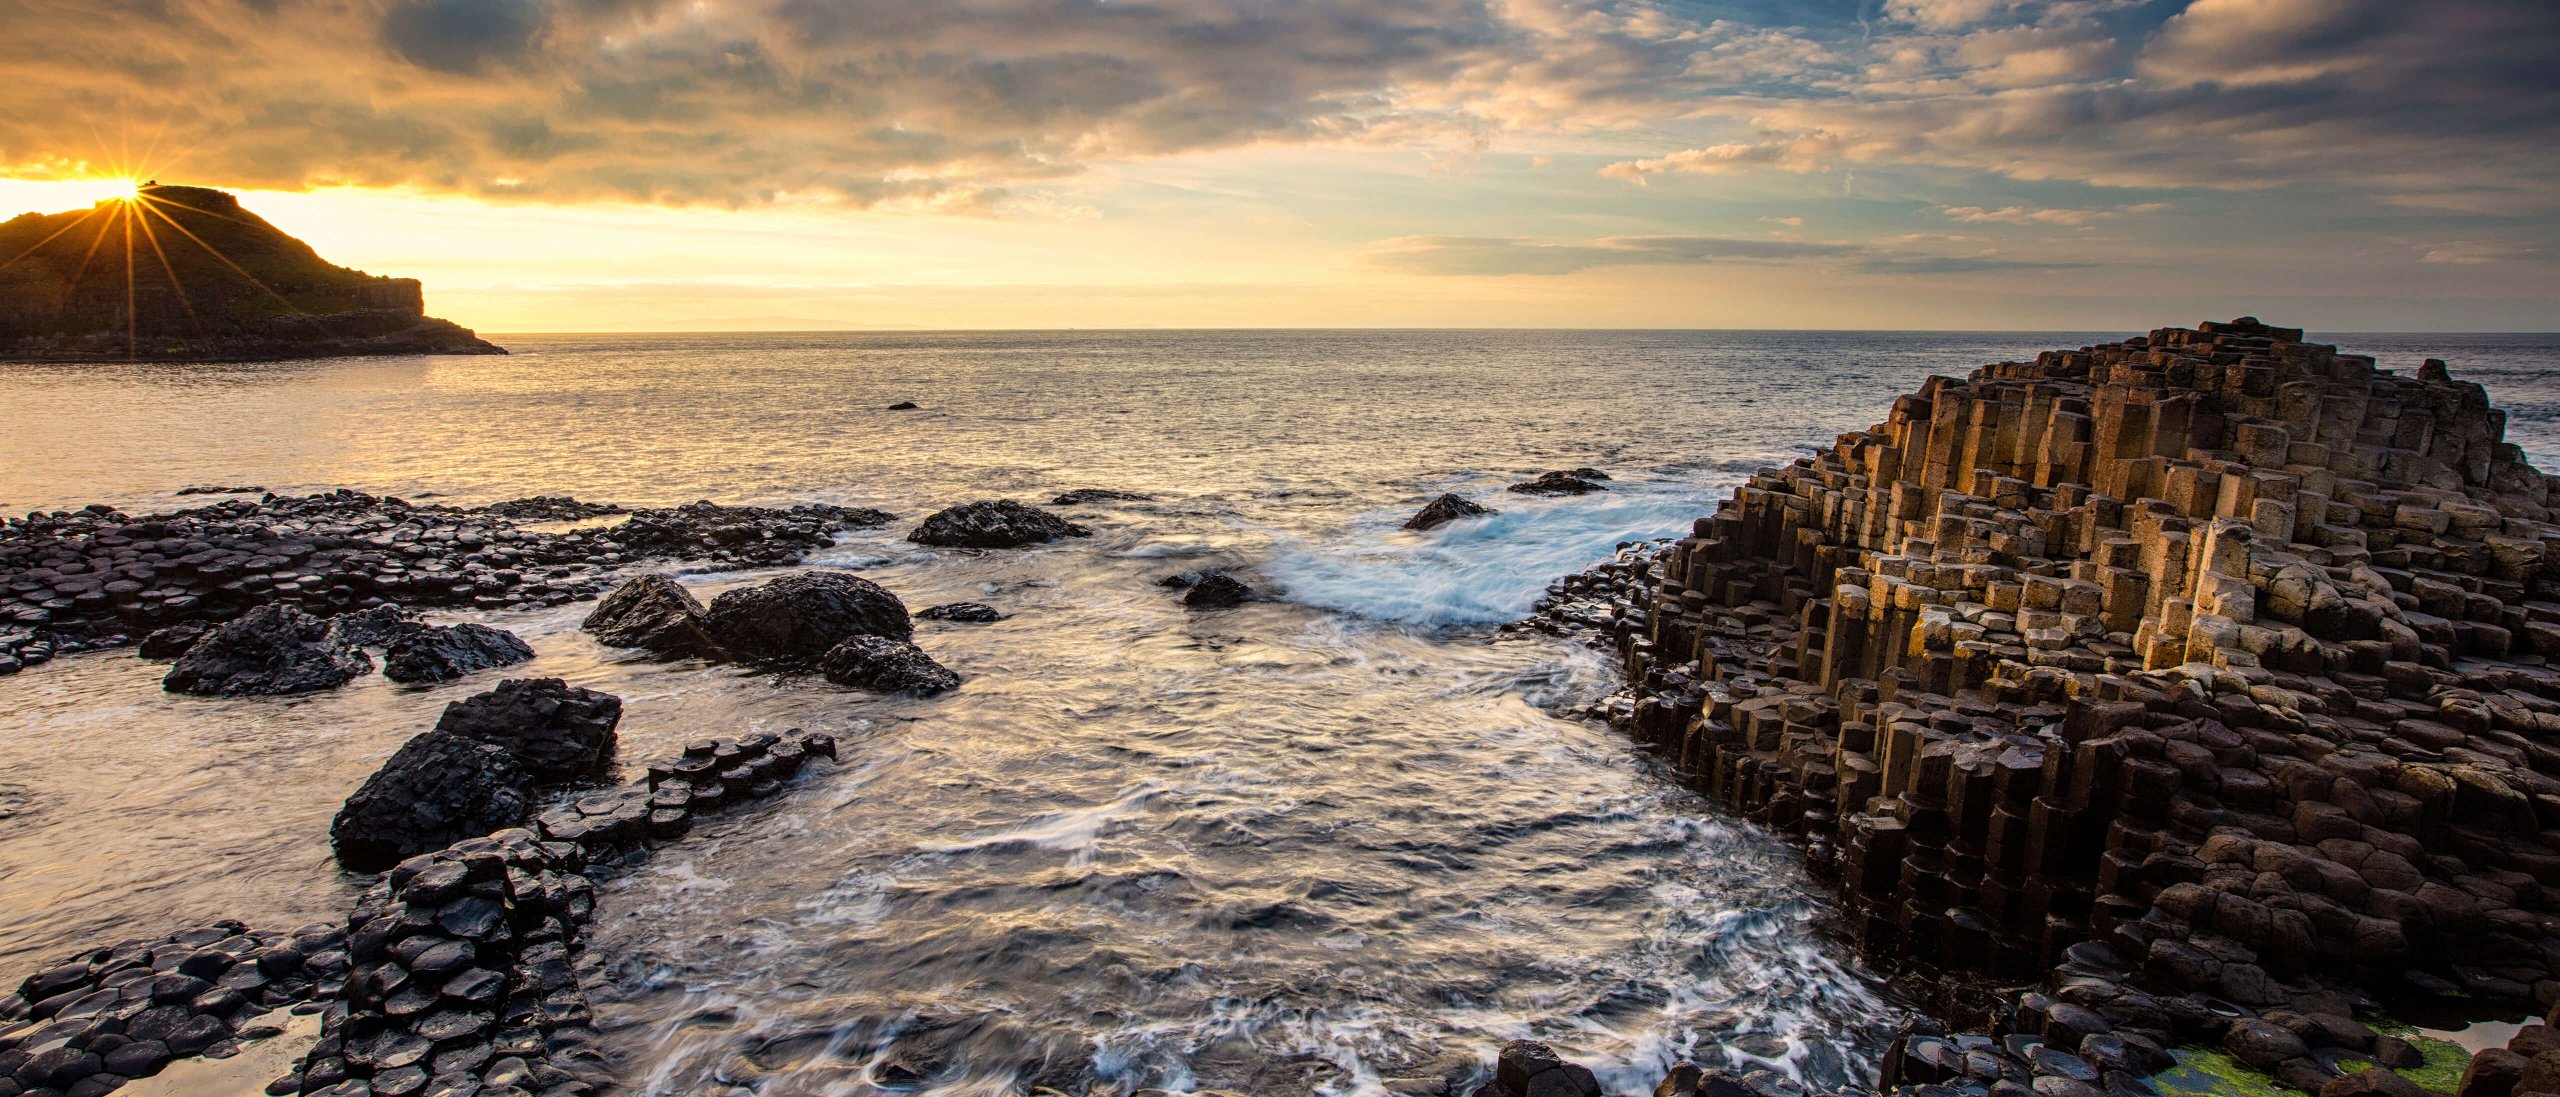 The Giant's Causeway in Northern Ireland at sunrise